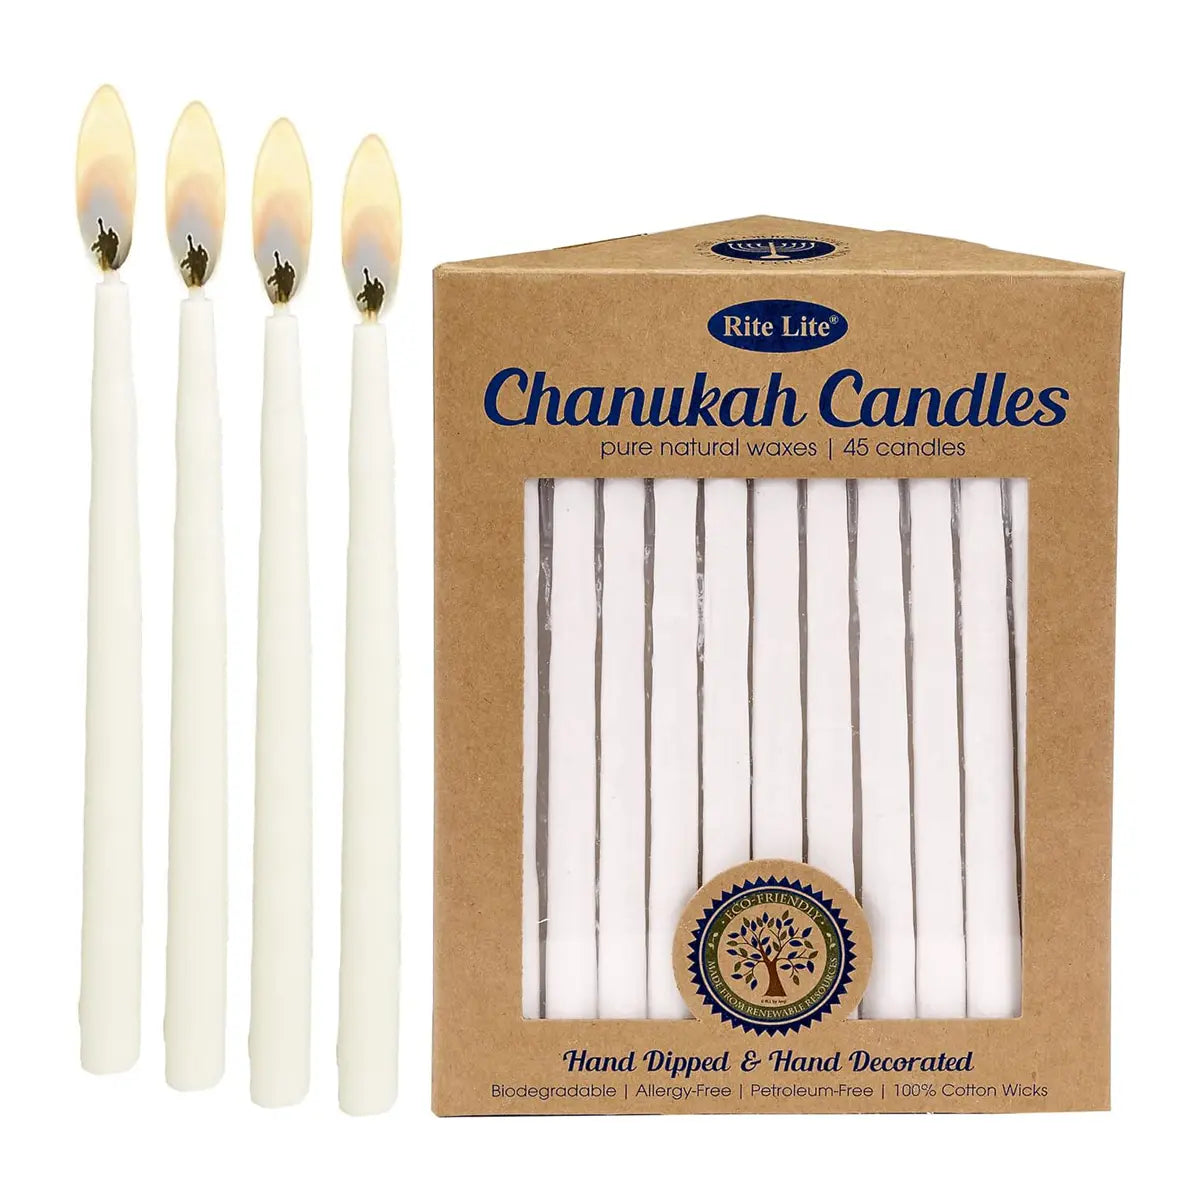 Rite Lite Hand Dipped Natural Wax Ivory Hanukah Candles Pure Natural Waves fourty five Candles Hand dipped and hand decorated biodegradable allergy free petroleum free one hundred percent cotton wicks